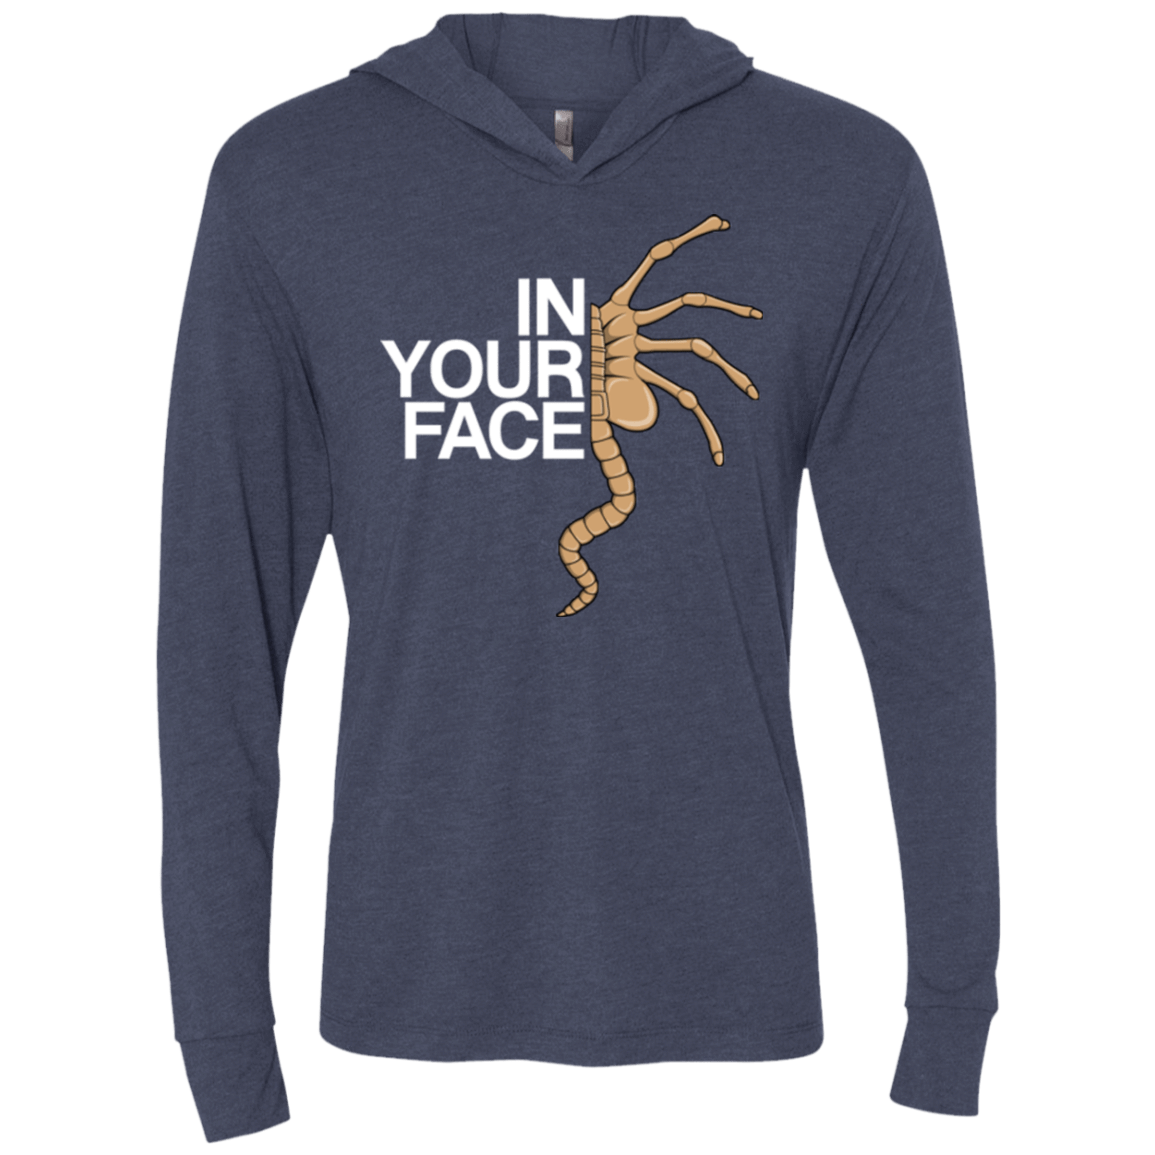 IN YOUR FACE Triblend Long Sleeve Hoodie Tee